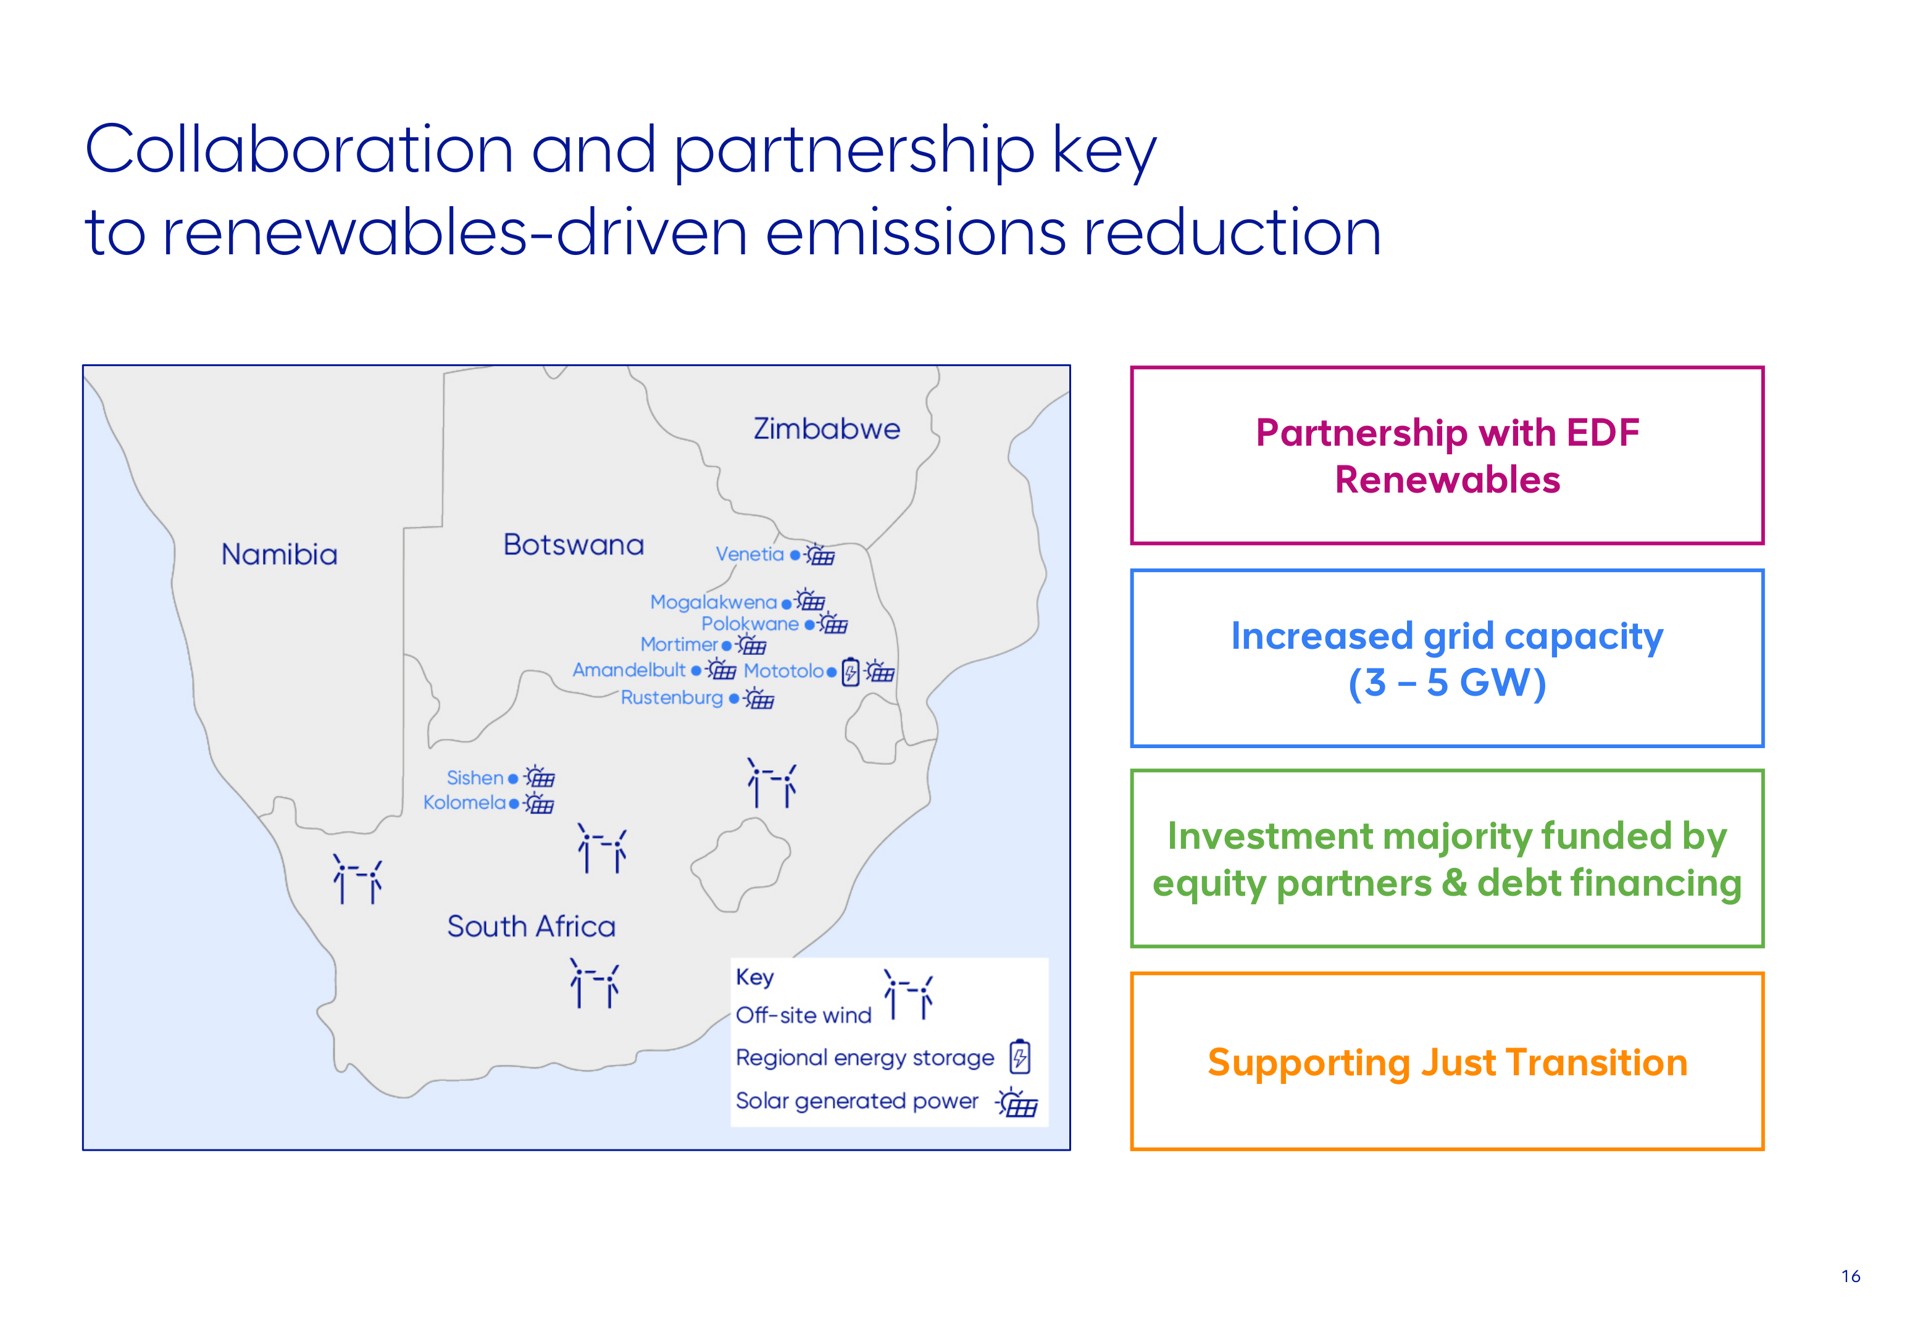 collaboration and partnership key to driven emissions reduction | AngloAmerican